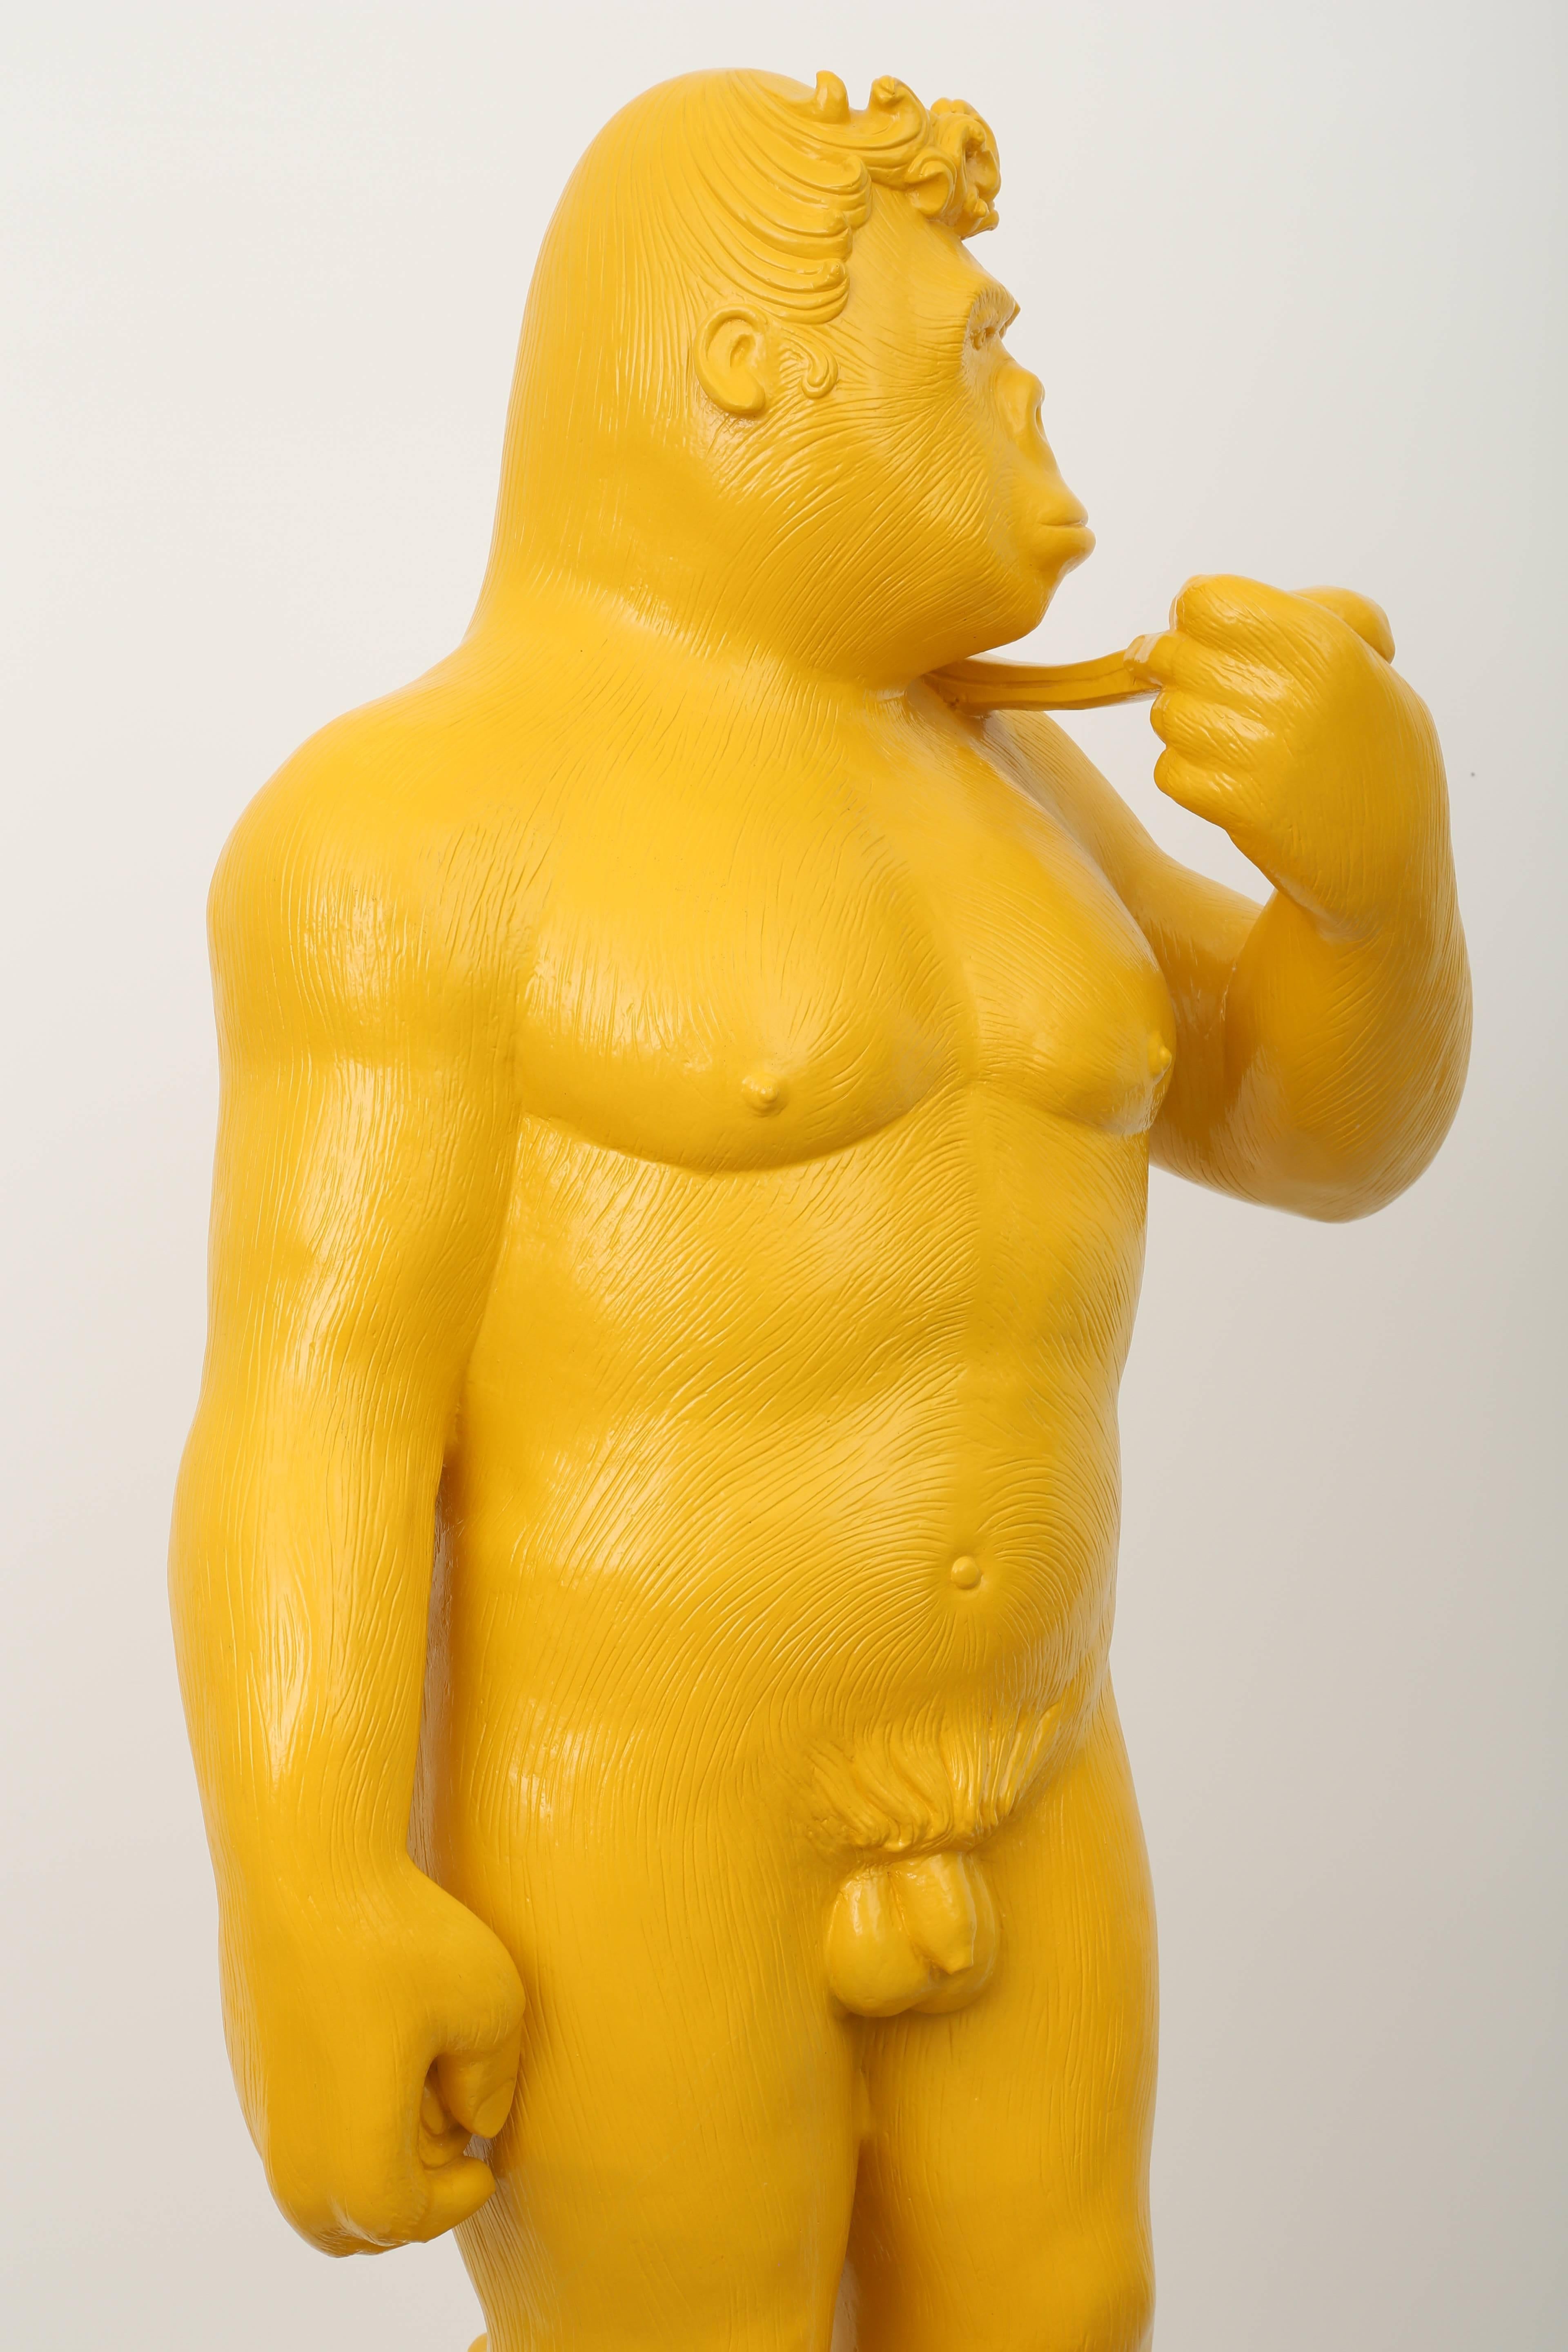 Soon ! Yellow Gorilla Sculpture in the posture of the 